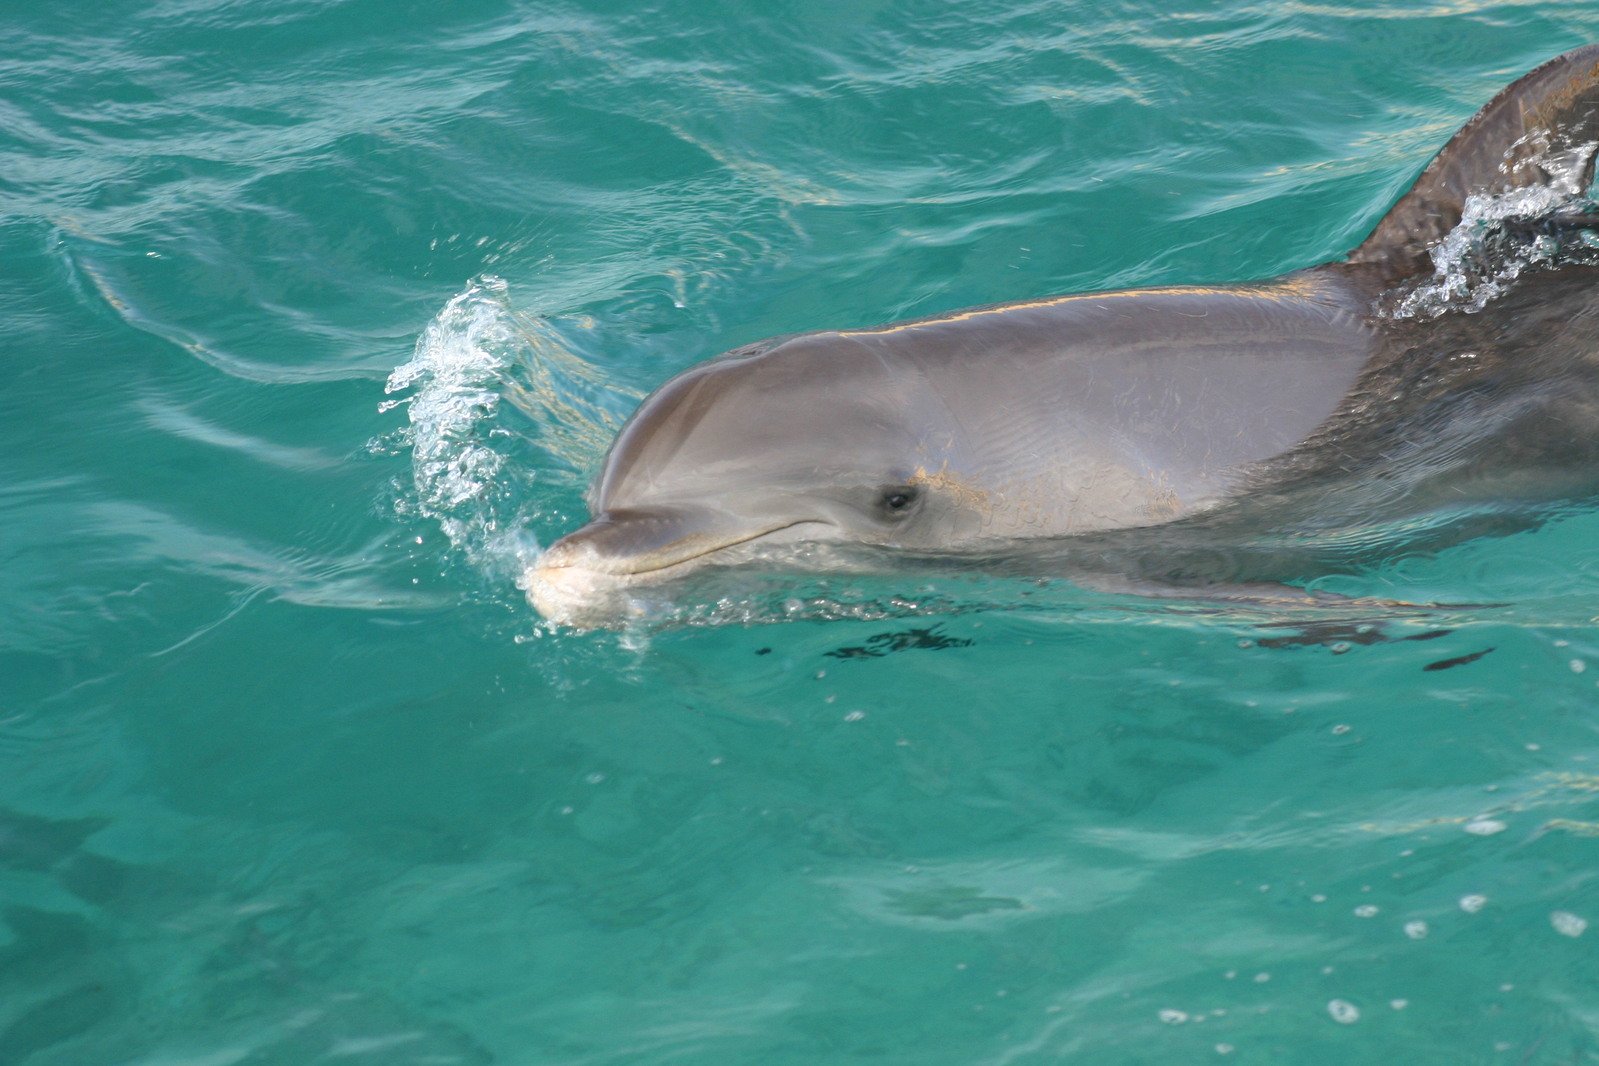 the dolphin is enjoying swimming in the water